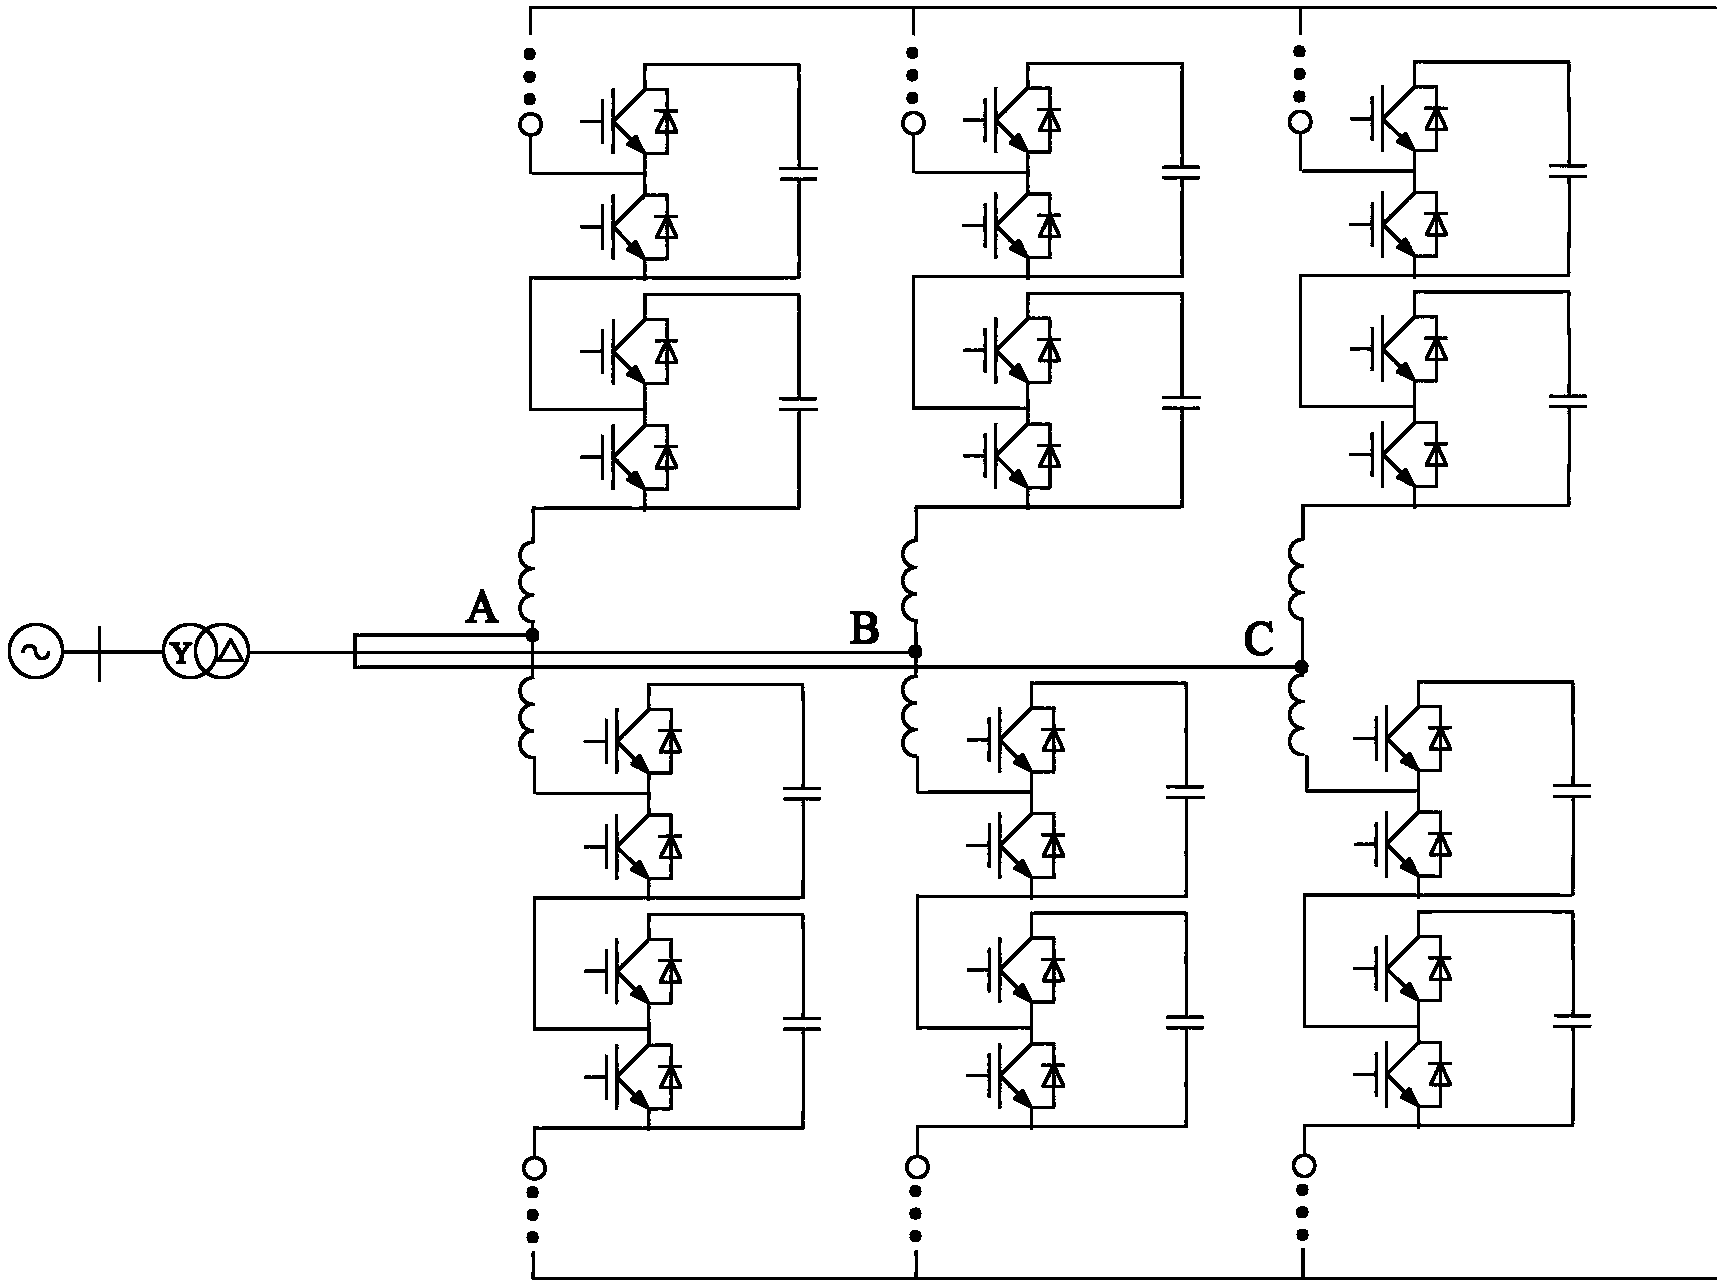 Experimental system and method for MMC (multilevel modular converter) flexible direct-current transmission control protection equipment